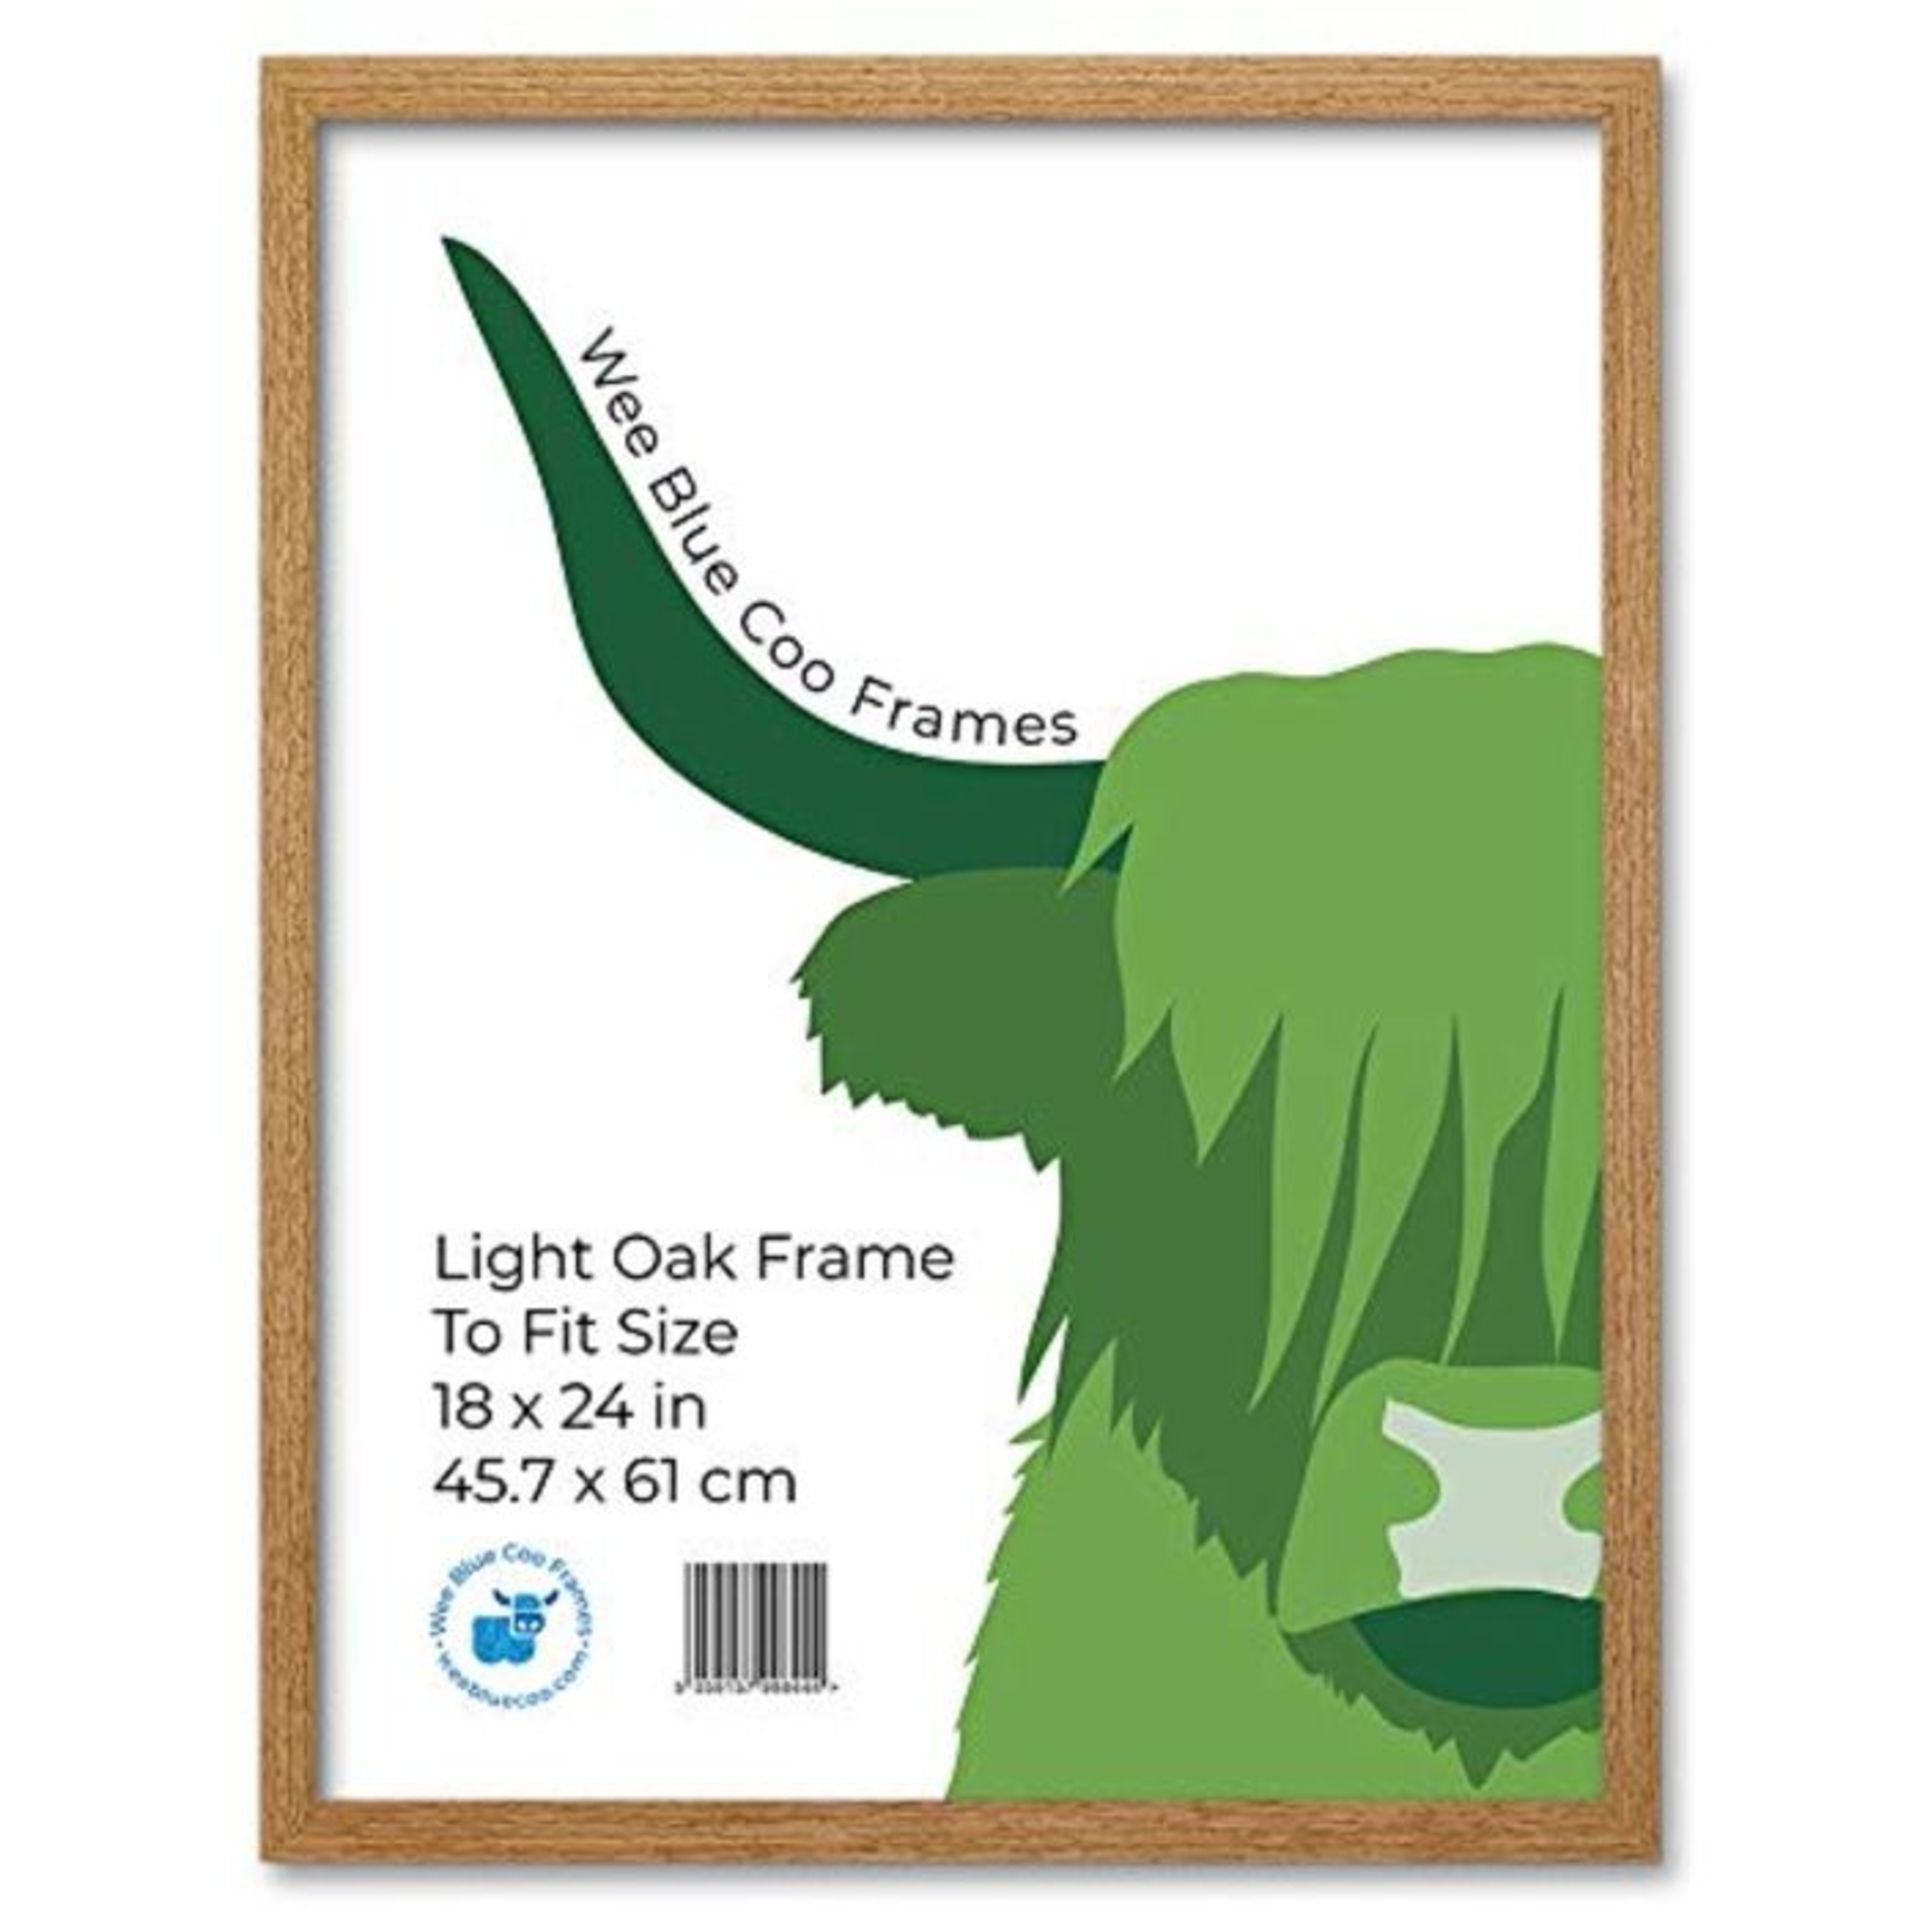 Wee Blue Coo 18x24 Light Oak Wooden Picture Frame 18 x 24 Inch (45.7 x 61 cm) Acrylic